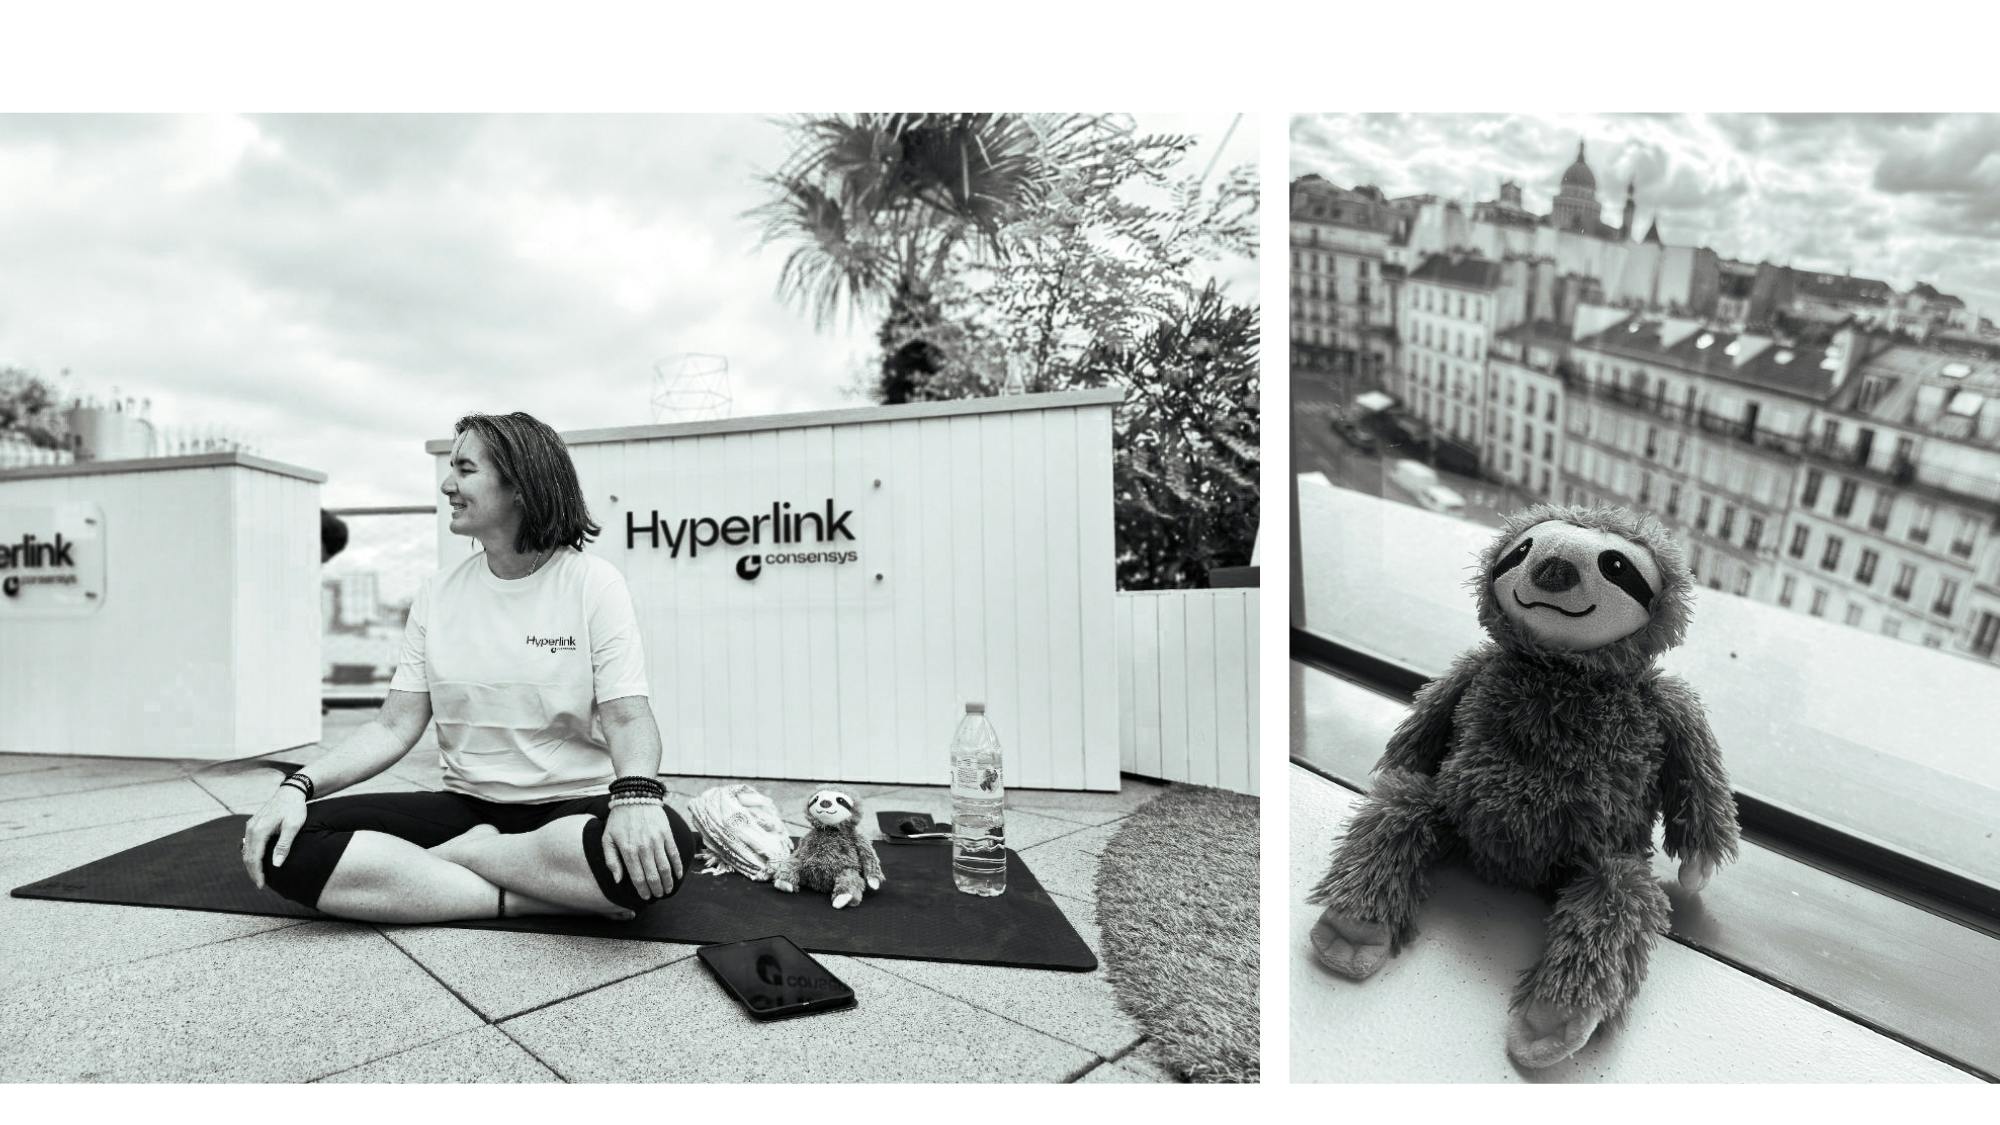 Leading a meditation on the rooftop at Hyperlink. Beyond thrilled that I got to blast Krishna Dass from a Parisian rooftop at a tech conference through a professional PA system for 2 hours. Blissful. And Sammie the Sloth held down the fort. I'm normalizing adult stuffies and so far this summer, he's attended the ReFi Summit in Seattle and ETHCC in Paris. Not too shabby for a sloth.